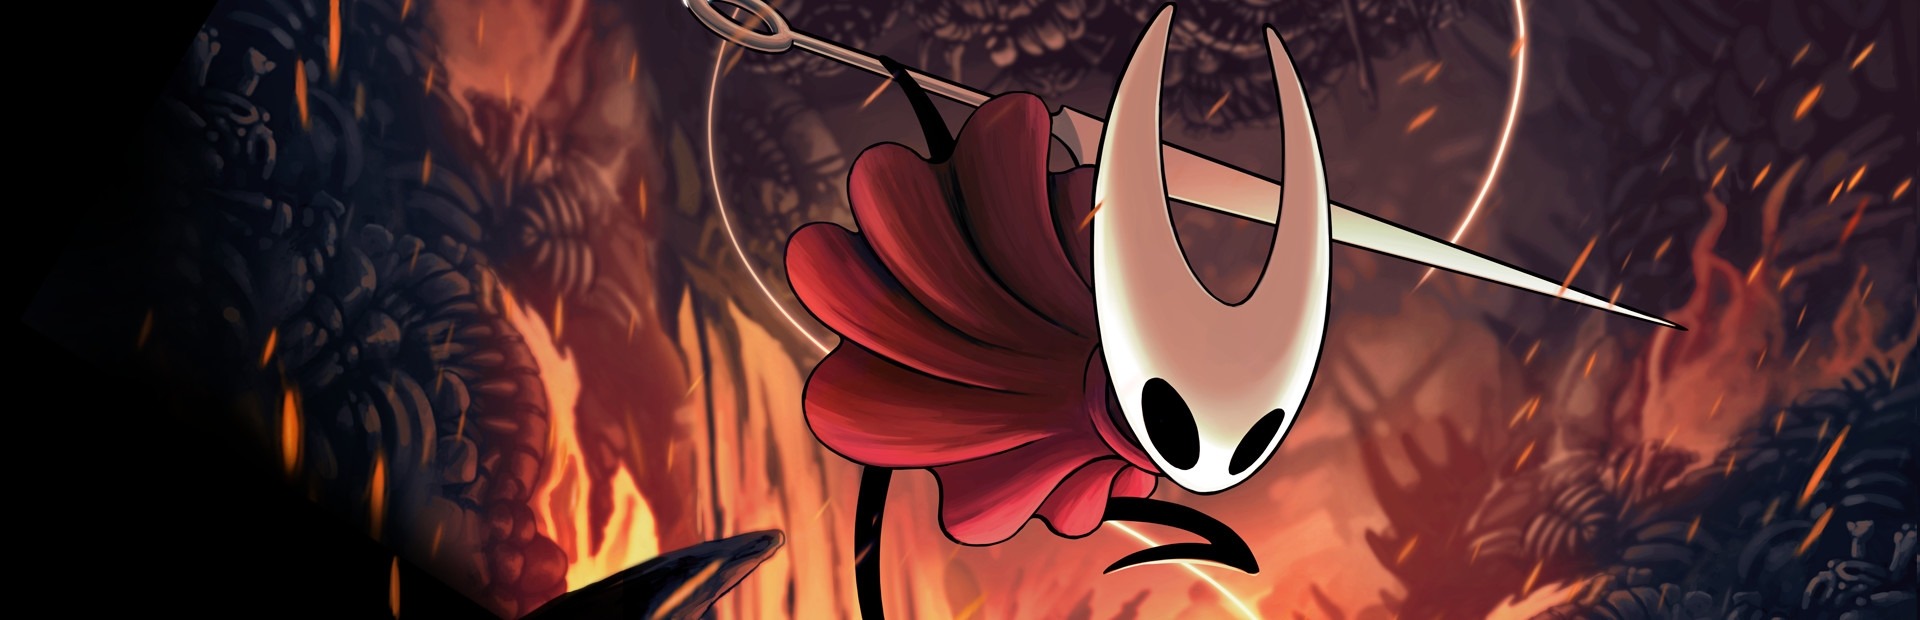 Hollow Knight: Silksong on Steam